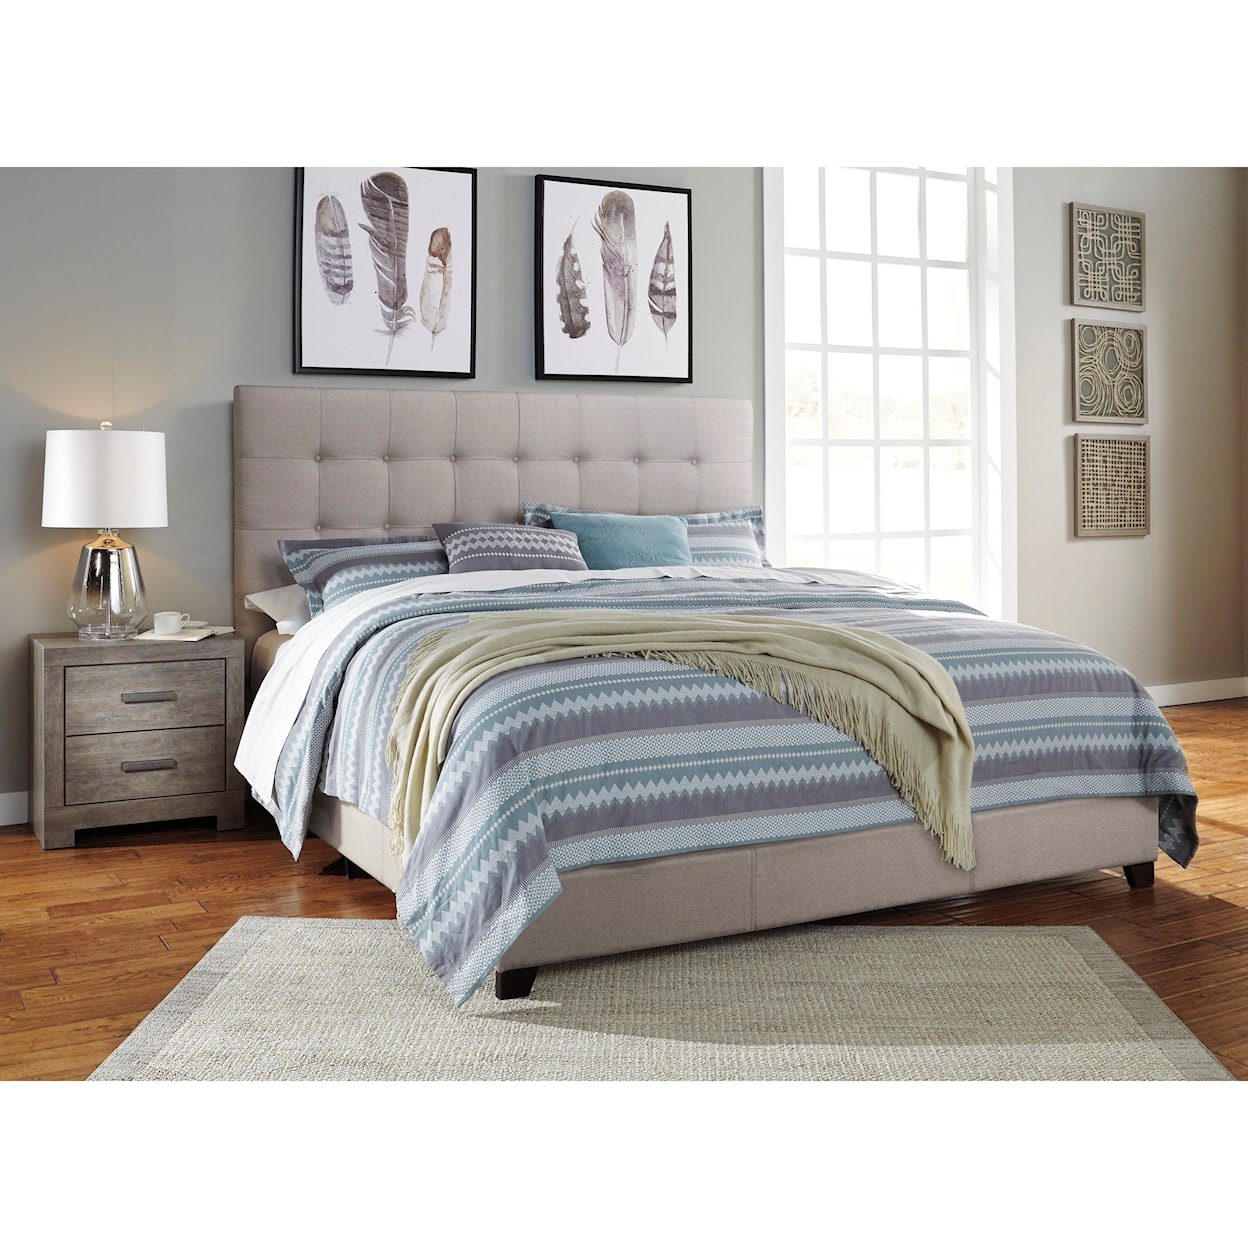 Signature Design by Ashley Furniture Dolante Queen Upholstered Bed